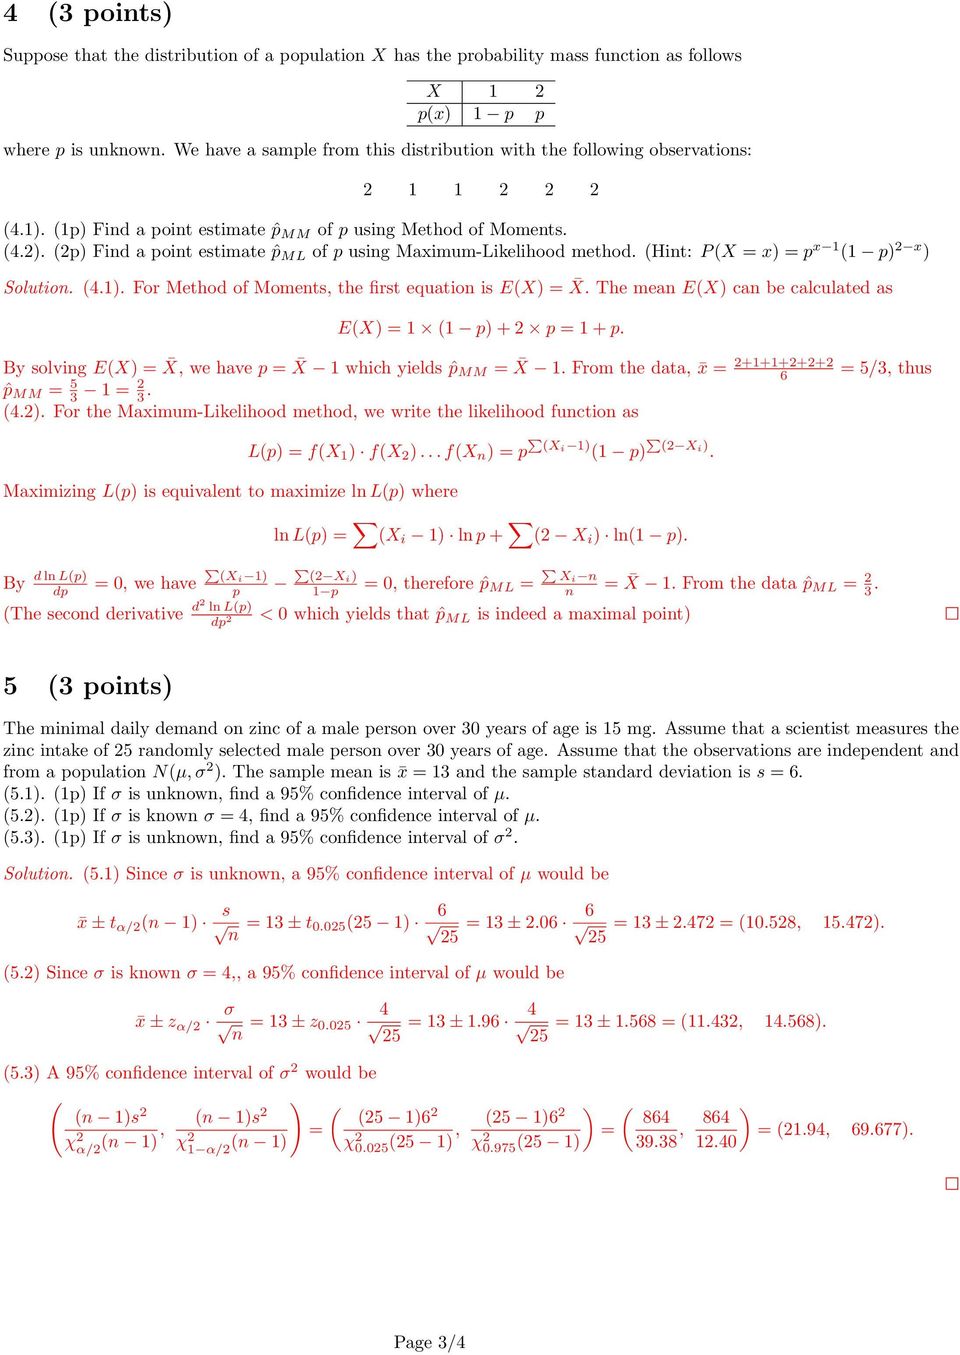 (2p) Find a point estimate ˆp ML of p using Maximum-Likelihood method. (Hint: P (X = x) = p x 1 (1 p) 2 x ) Solution. (4.1). For Method of Moments, the first equation is E(X) = X.